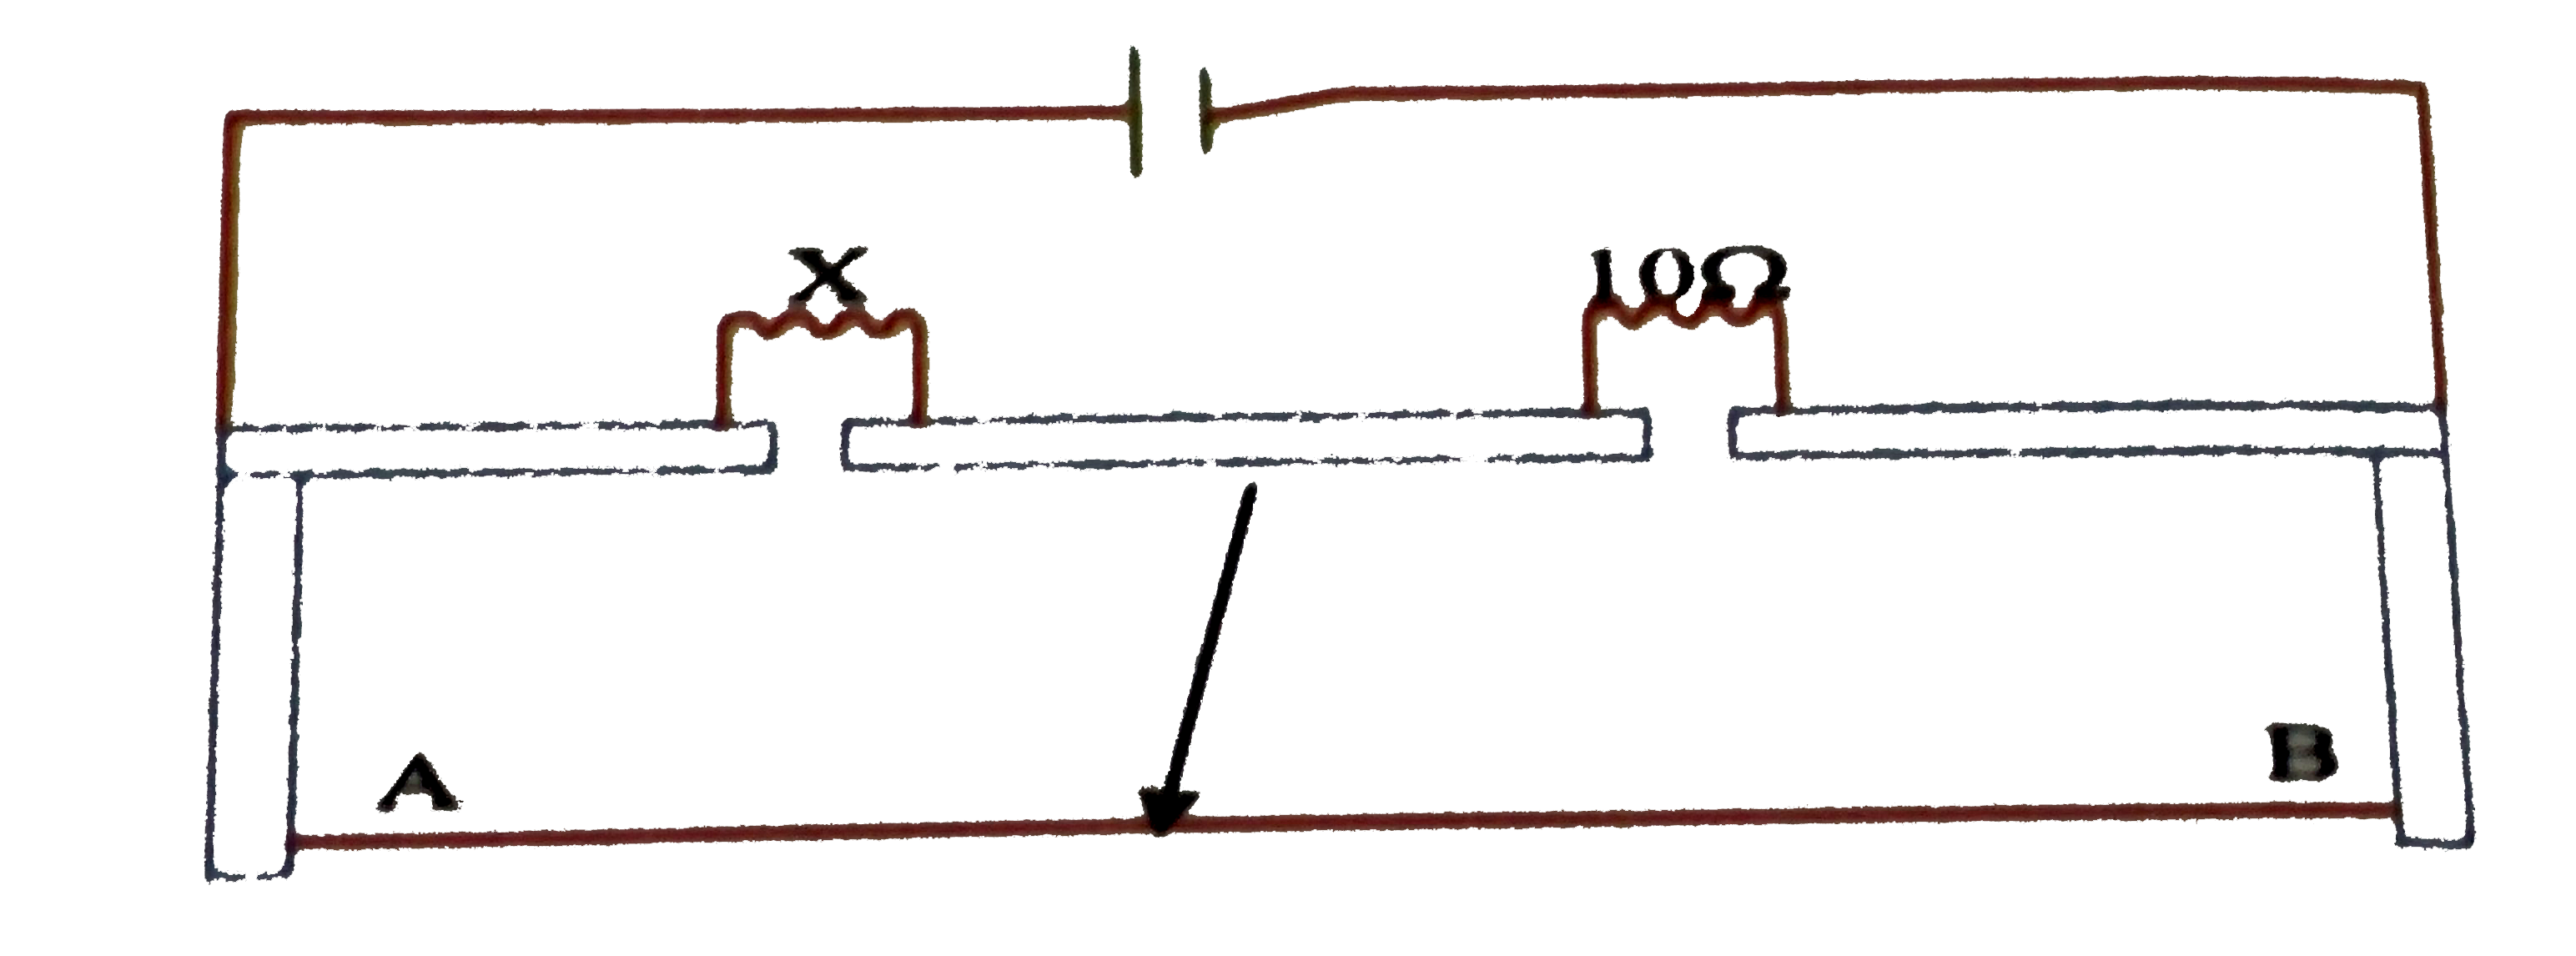 A meter bridge is set-up as shown in figure to determine an unknown resistance X using a standard 10Omega resistor. The galvanometer shown null point when tapping key is at 52 cm mark. The end corrections are 1 cm and 2 cm respectively for the ends A and B. the determined value of X is